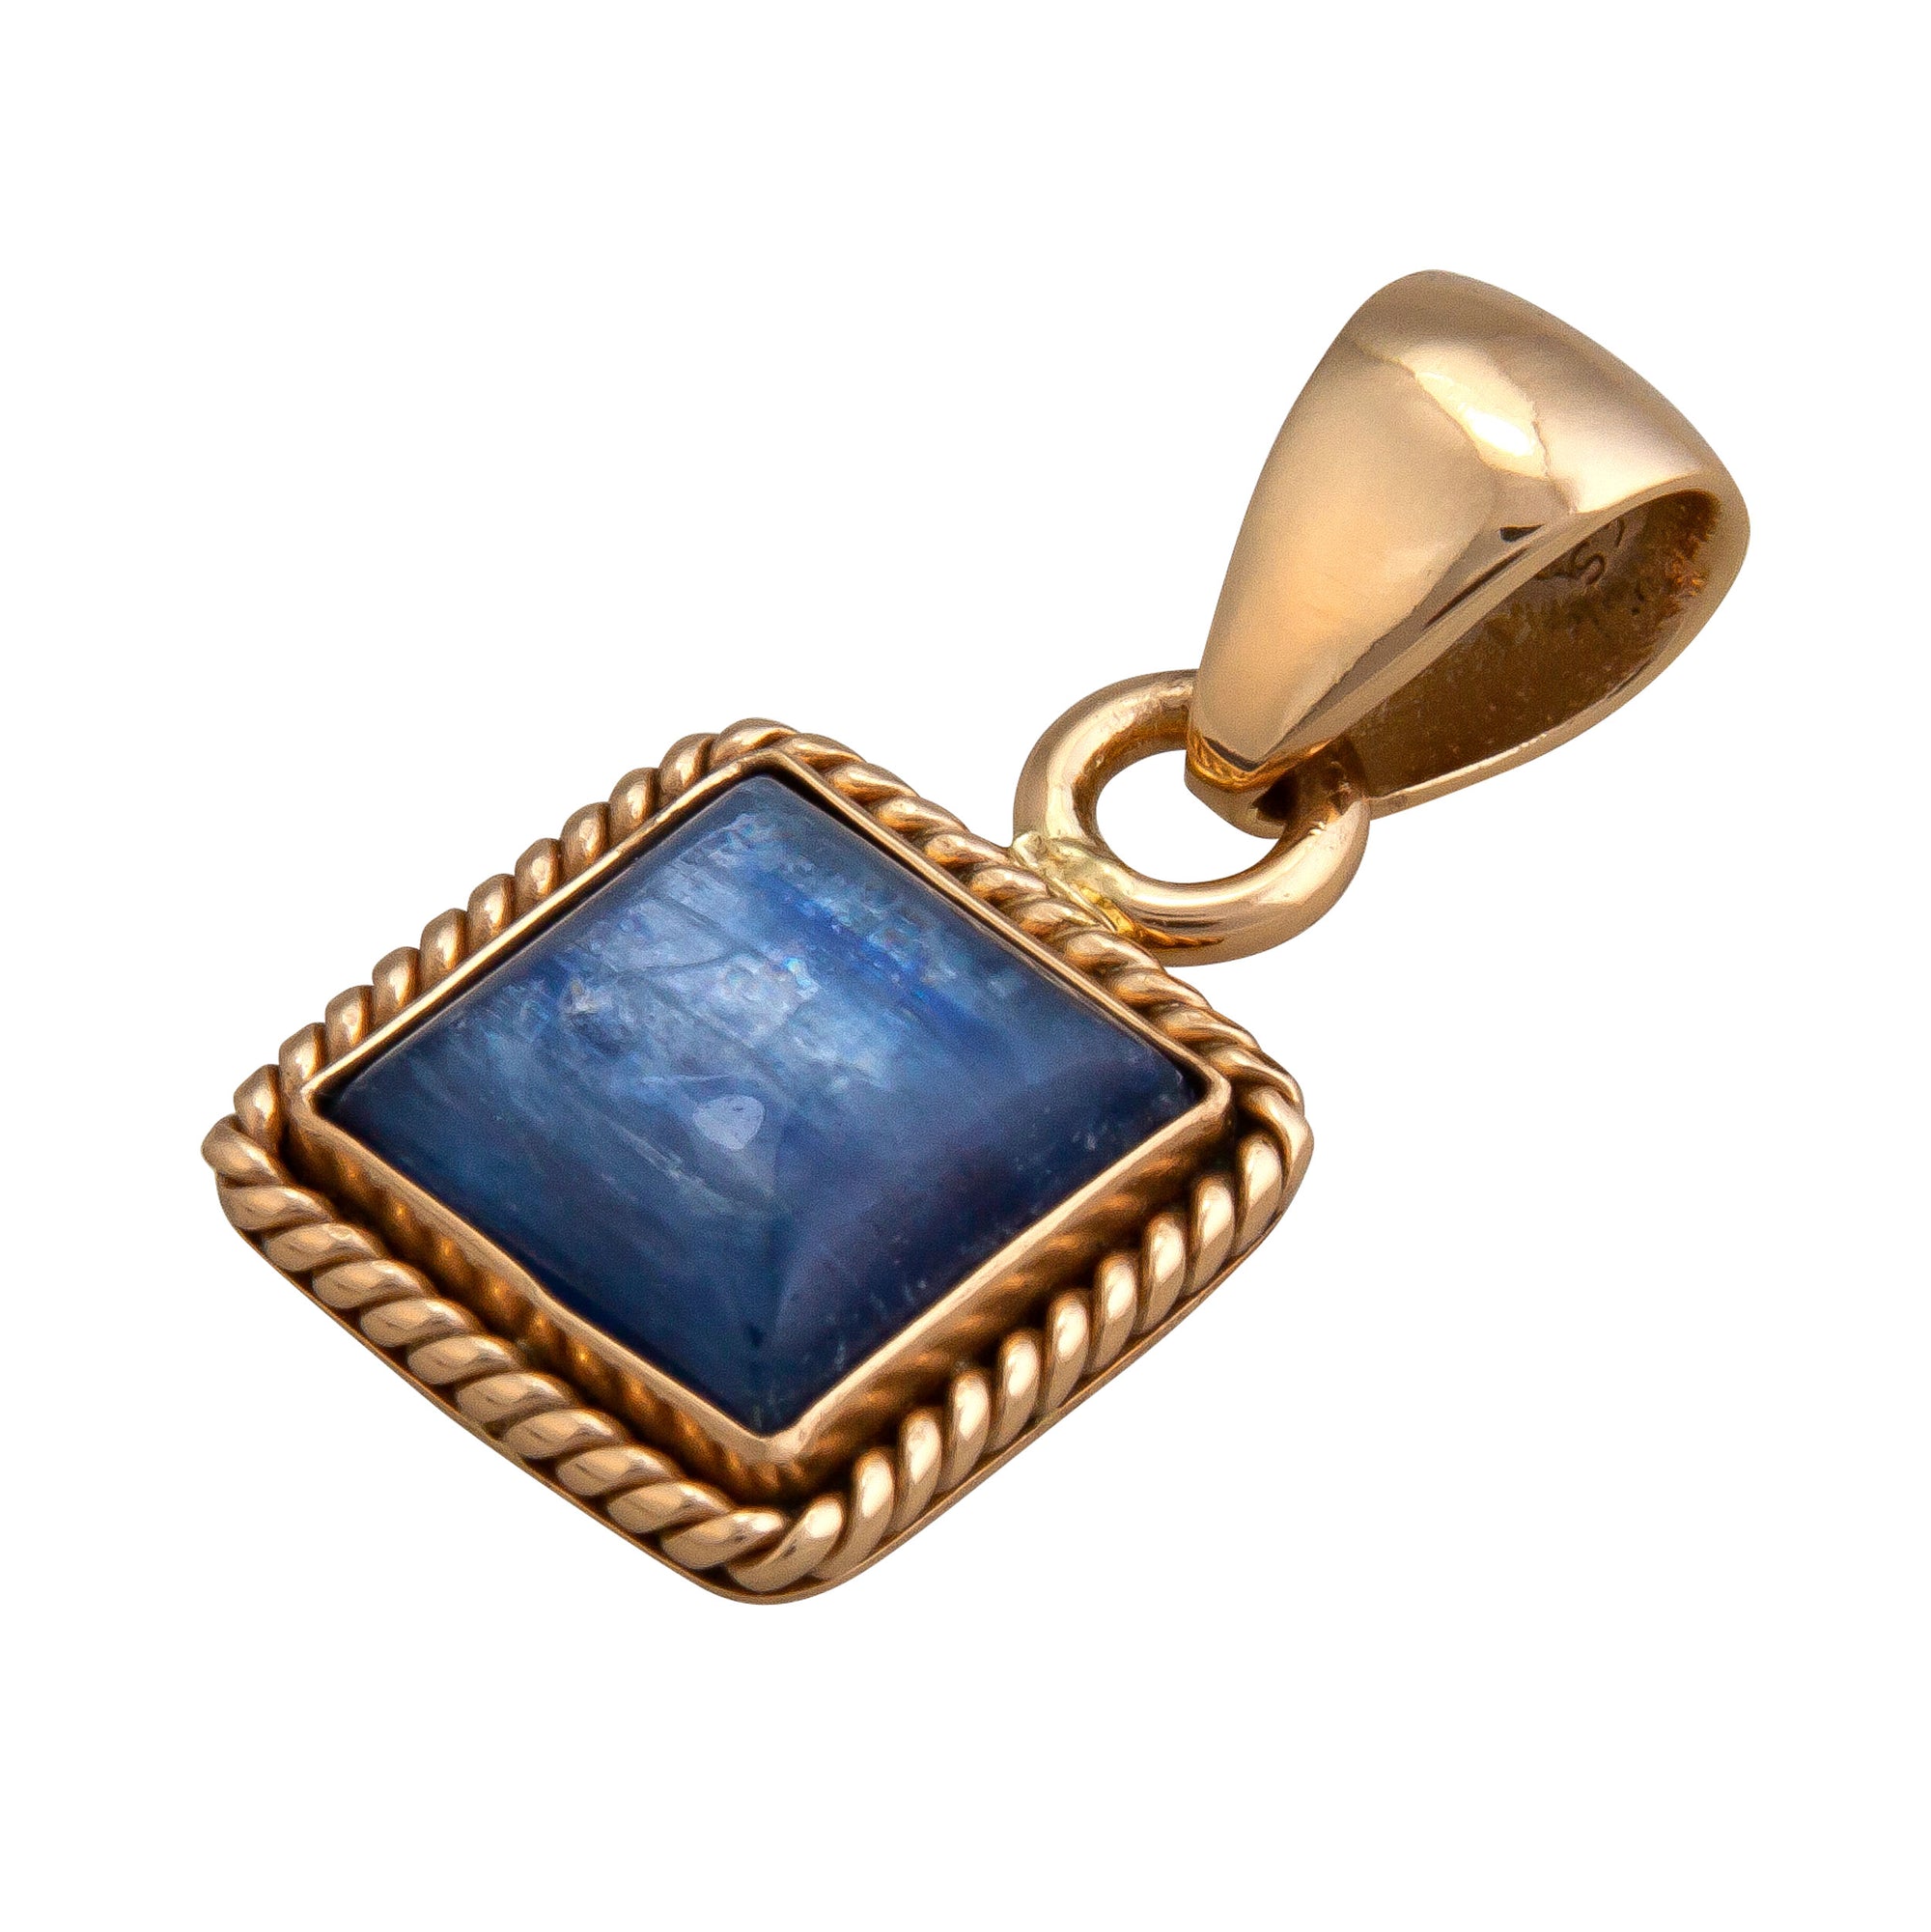 Charles Albert Jewelry - Alchemia Kyanite Square Pendant with Rope Edge - Side View